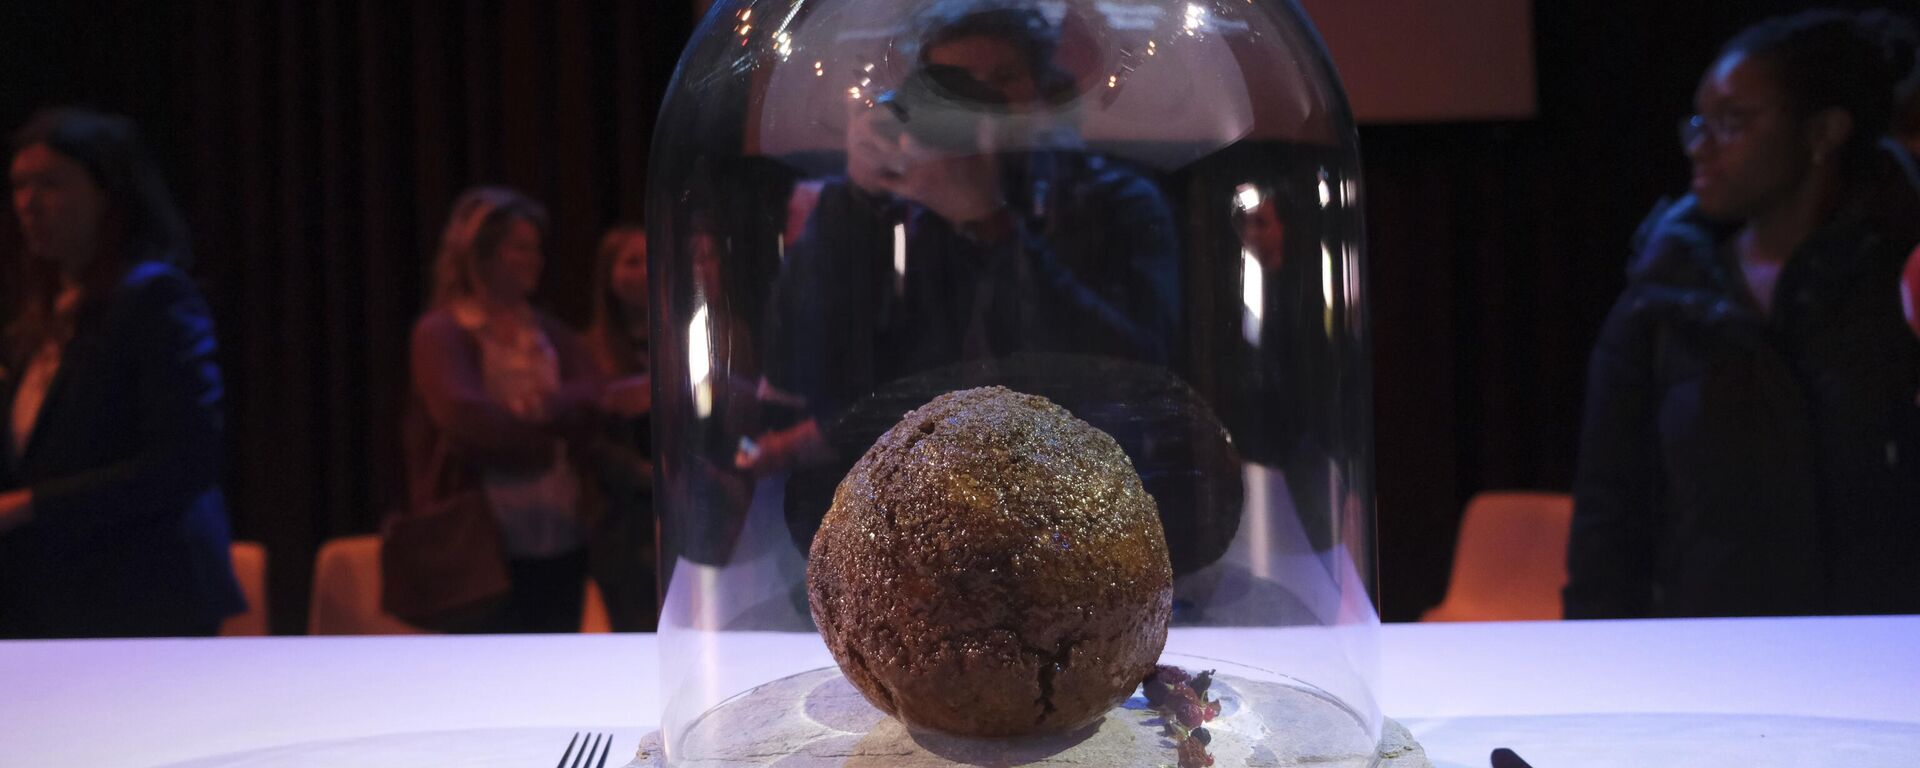 A meatball made using genetic code from a mammoth is seen at the Nemo science museum in Amsterdam, Tuesday March 28, 2023. - Sputnik International, 1920, 29.03.2023